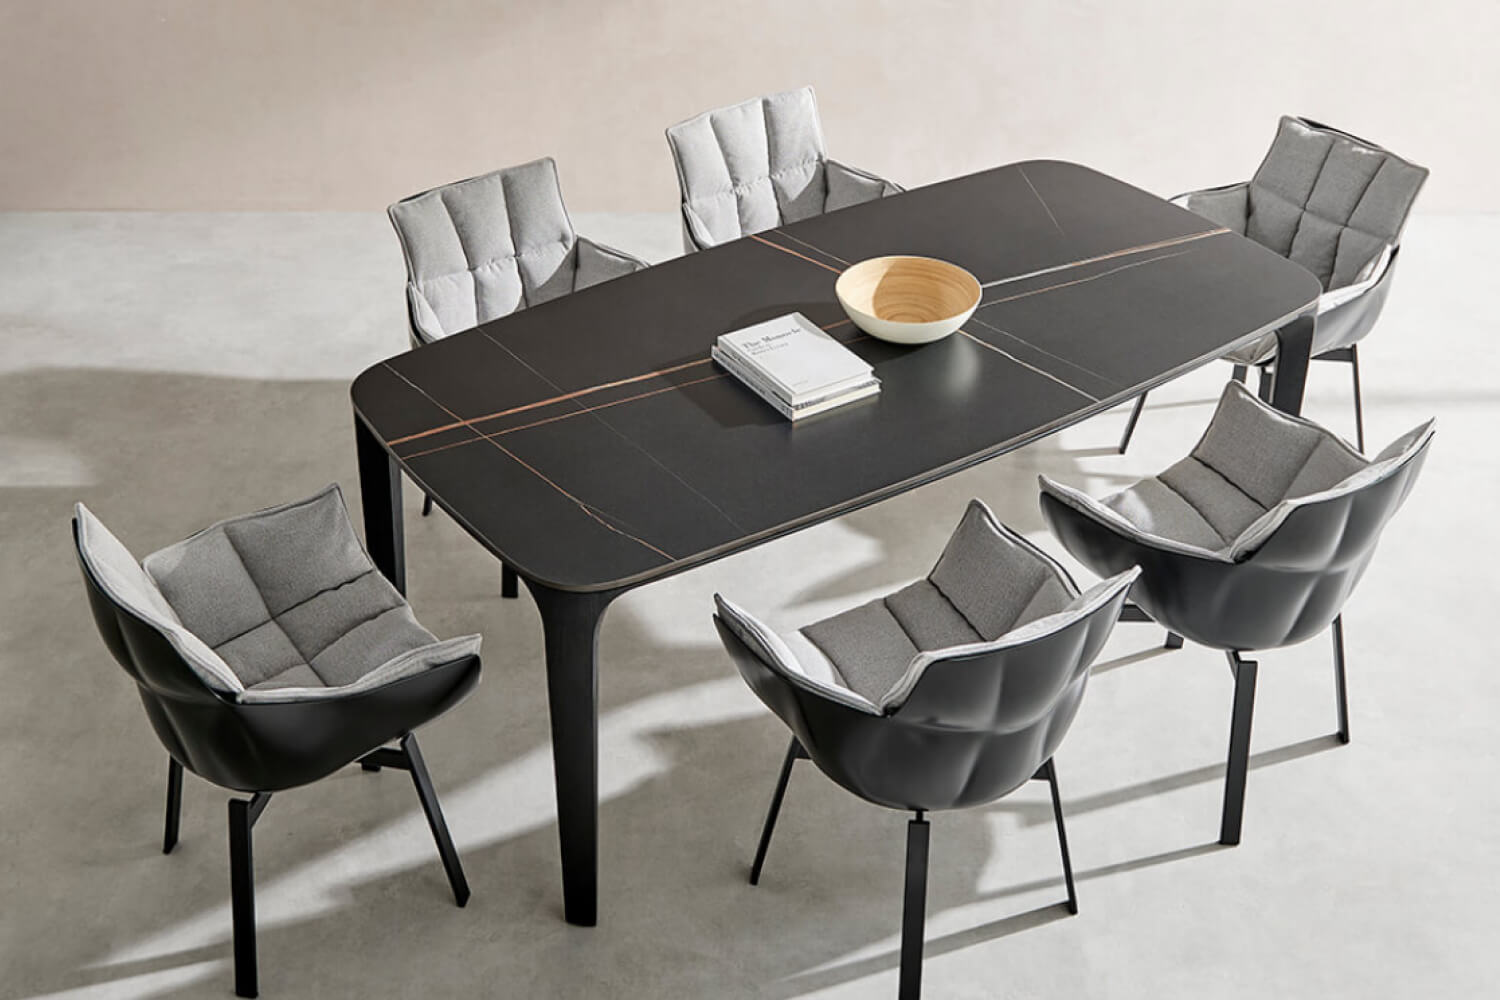 A modern dining area featuring the Myko Modern Rectangular Sintered Stone Dining Table. The table showcases a sleek black surface with subtle orange linear accents and six contemporary chairs upholstered in grey fabric.